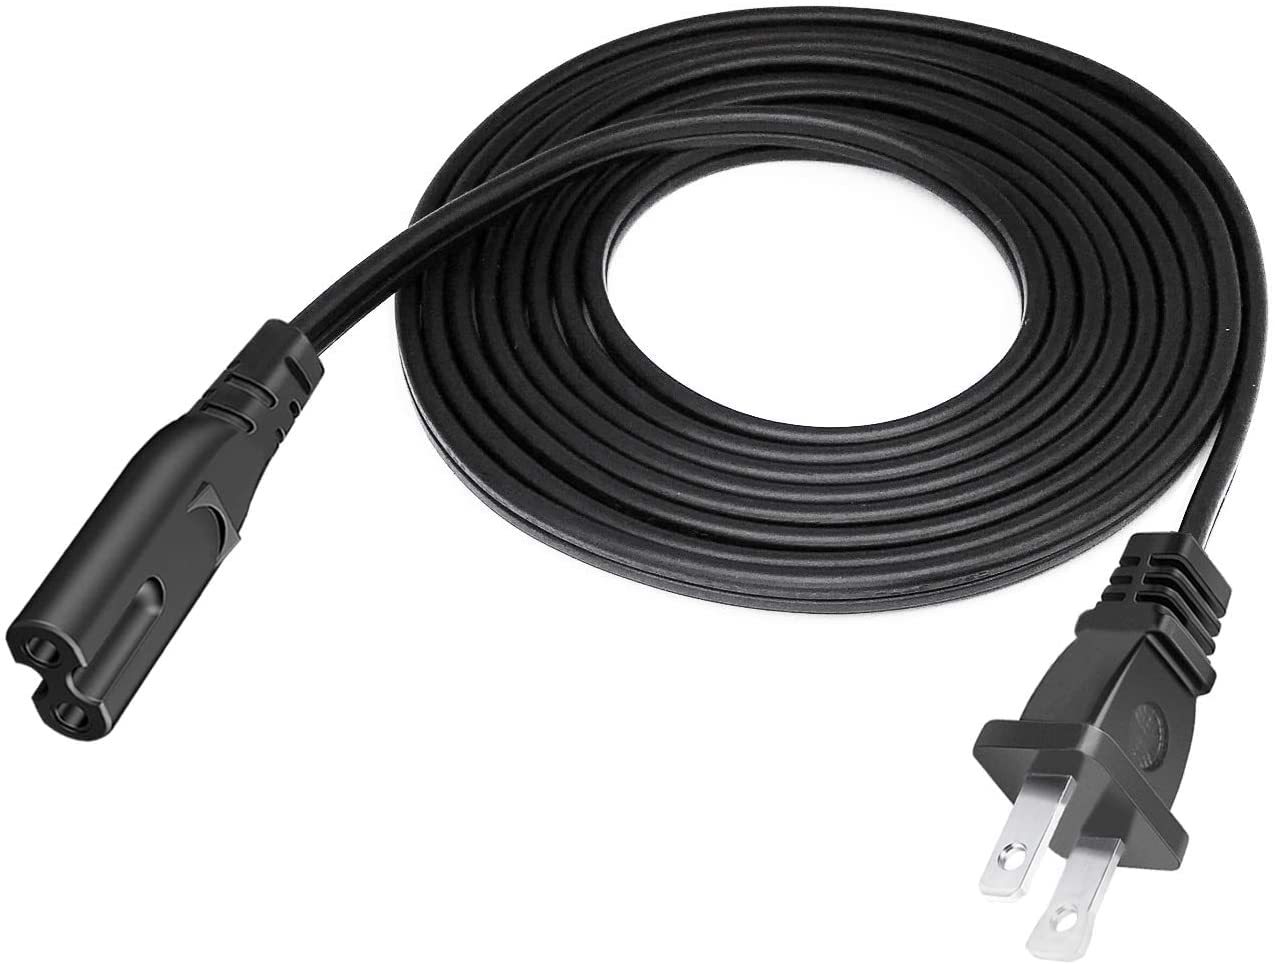 UL Listed 4ft 2 Prong Power Cable Replacement for TCL Roku Smart TV 32S3800 43UP - $8.39